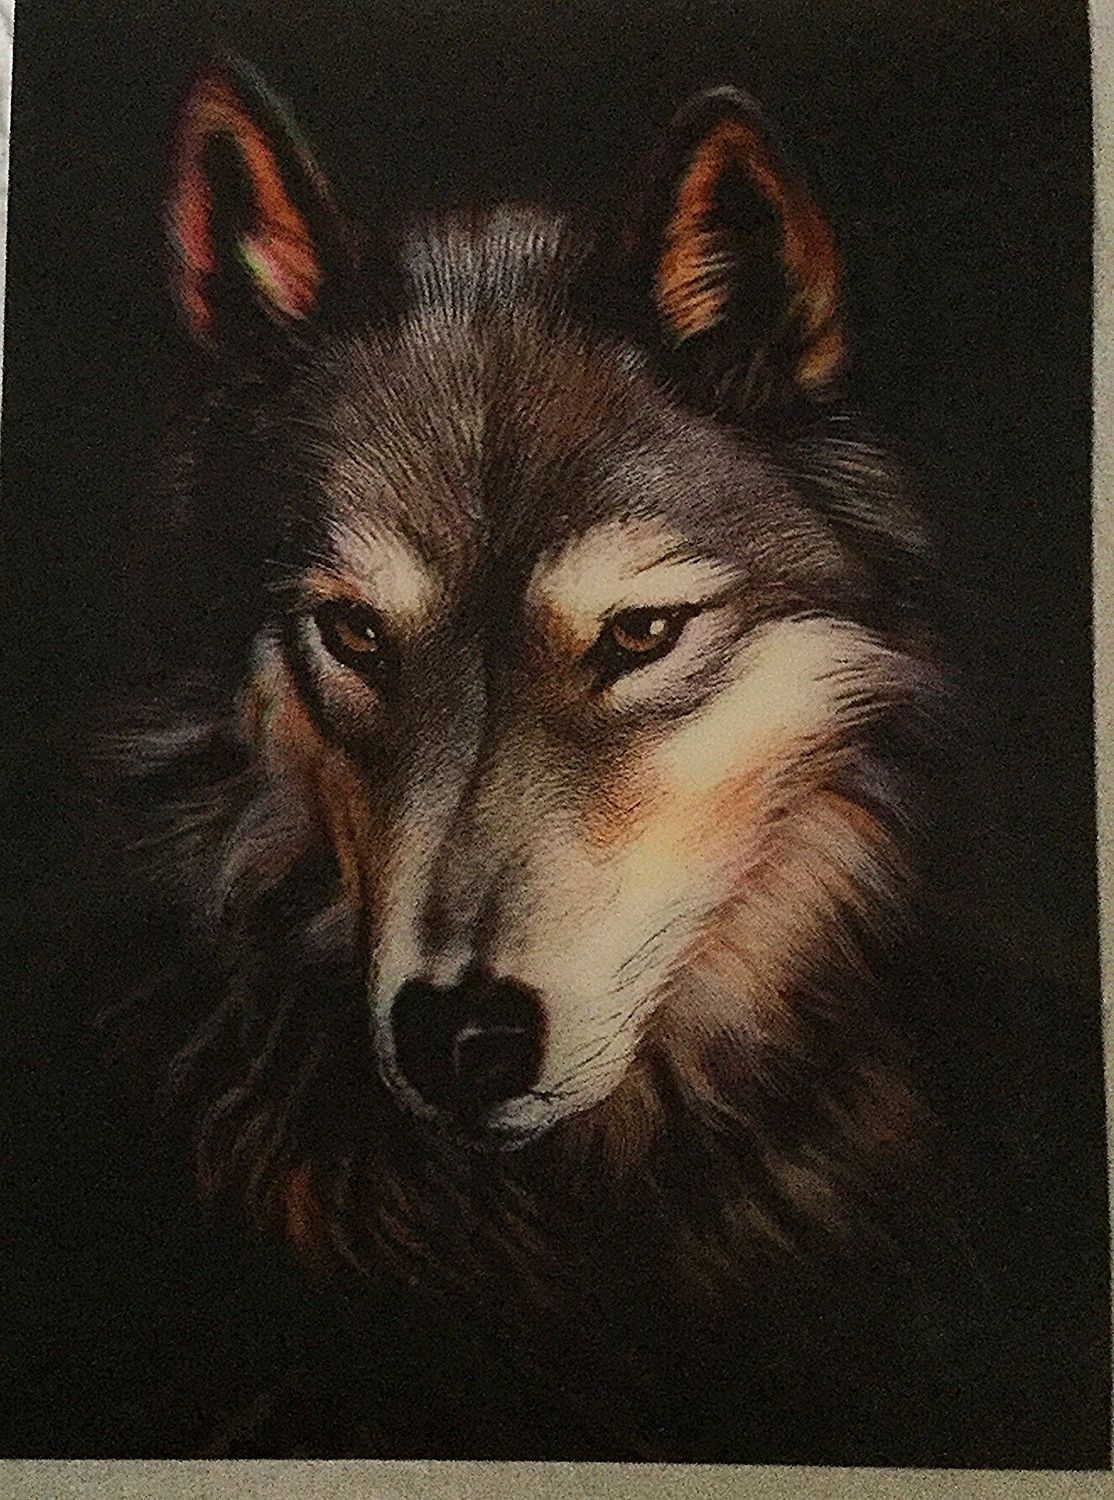 Amazon: 3d Wall Art – Wolf – 3d Lithographic Print – Amazing Within Popular Wolf 3d Wall Art (View 1 of 15)